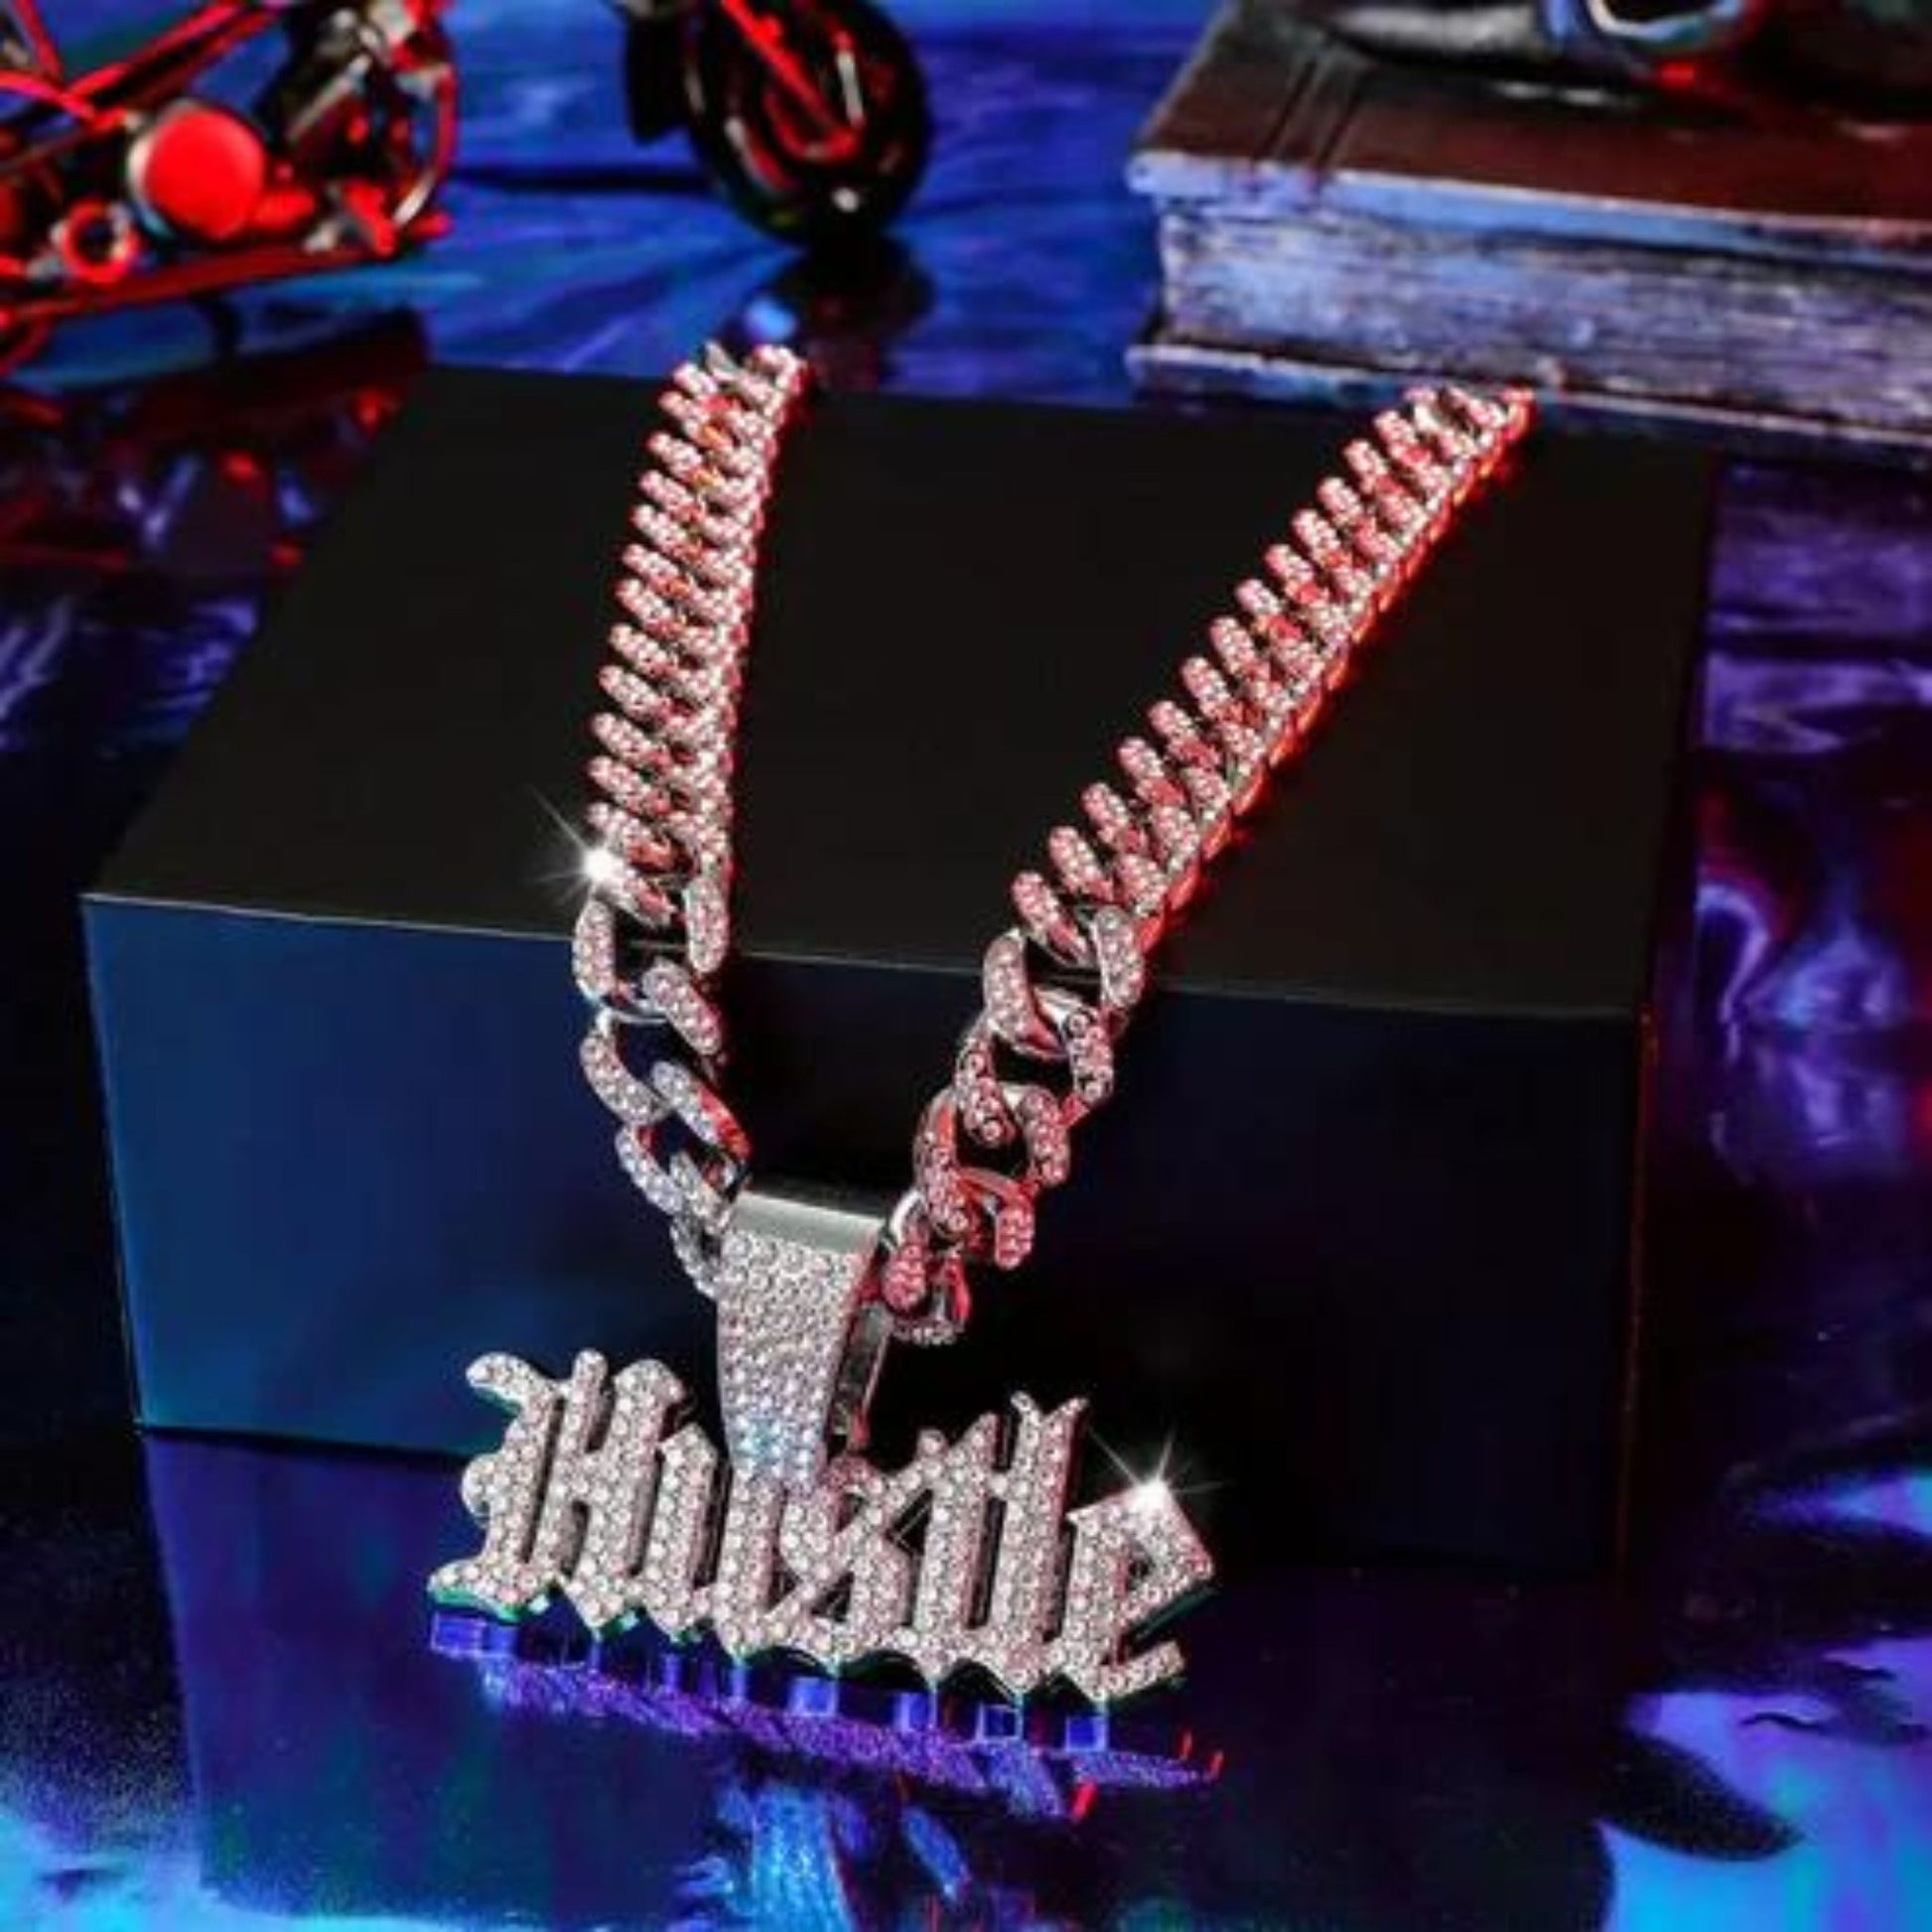 a necklace on a box